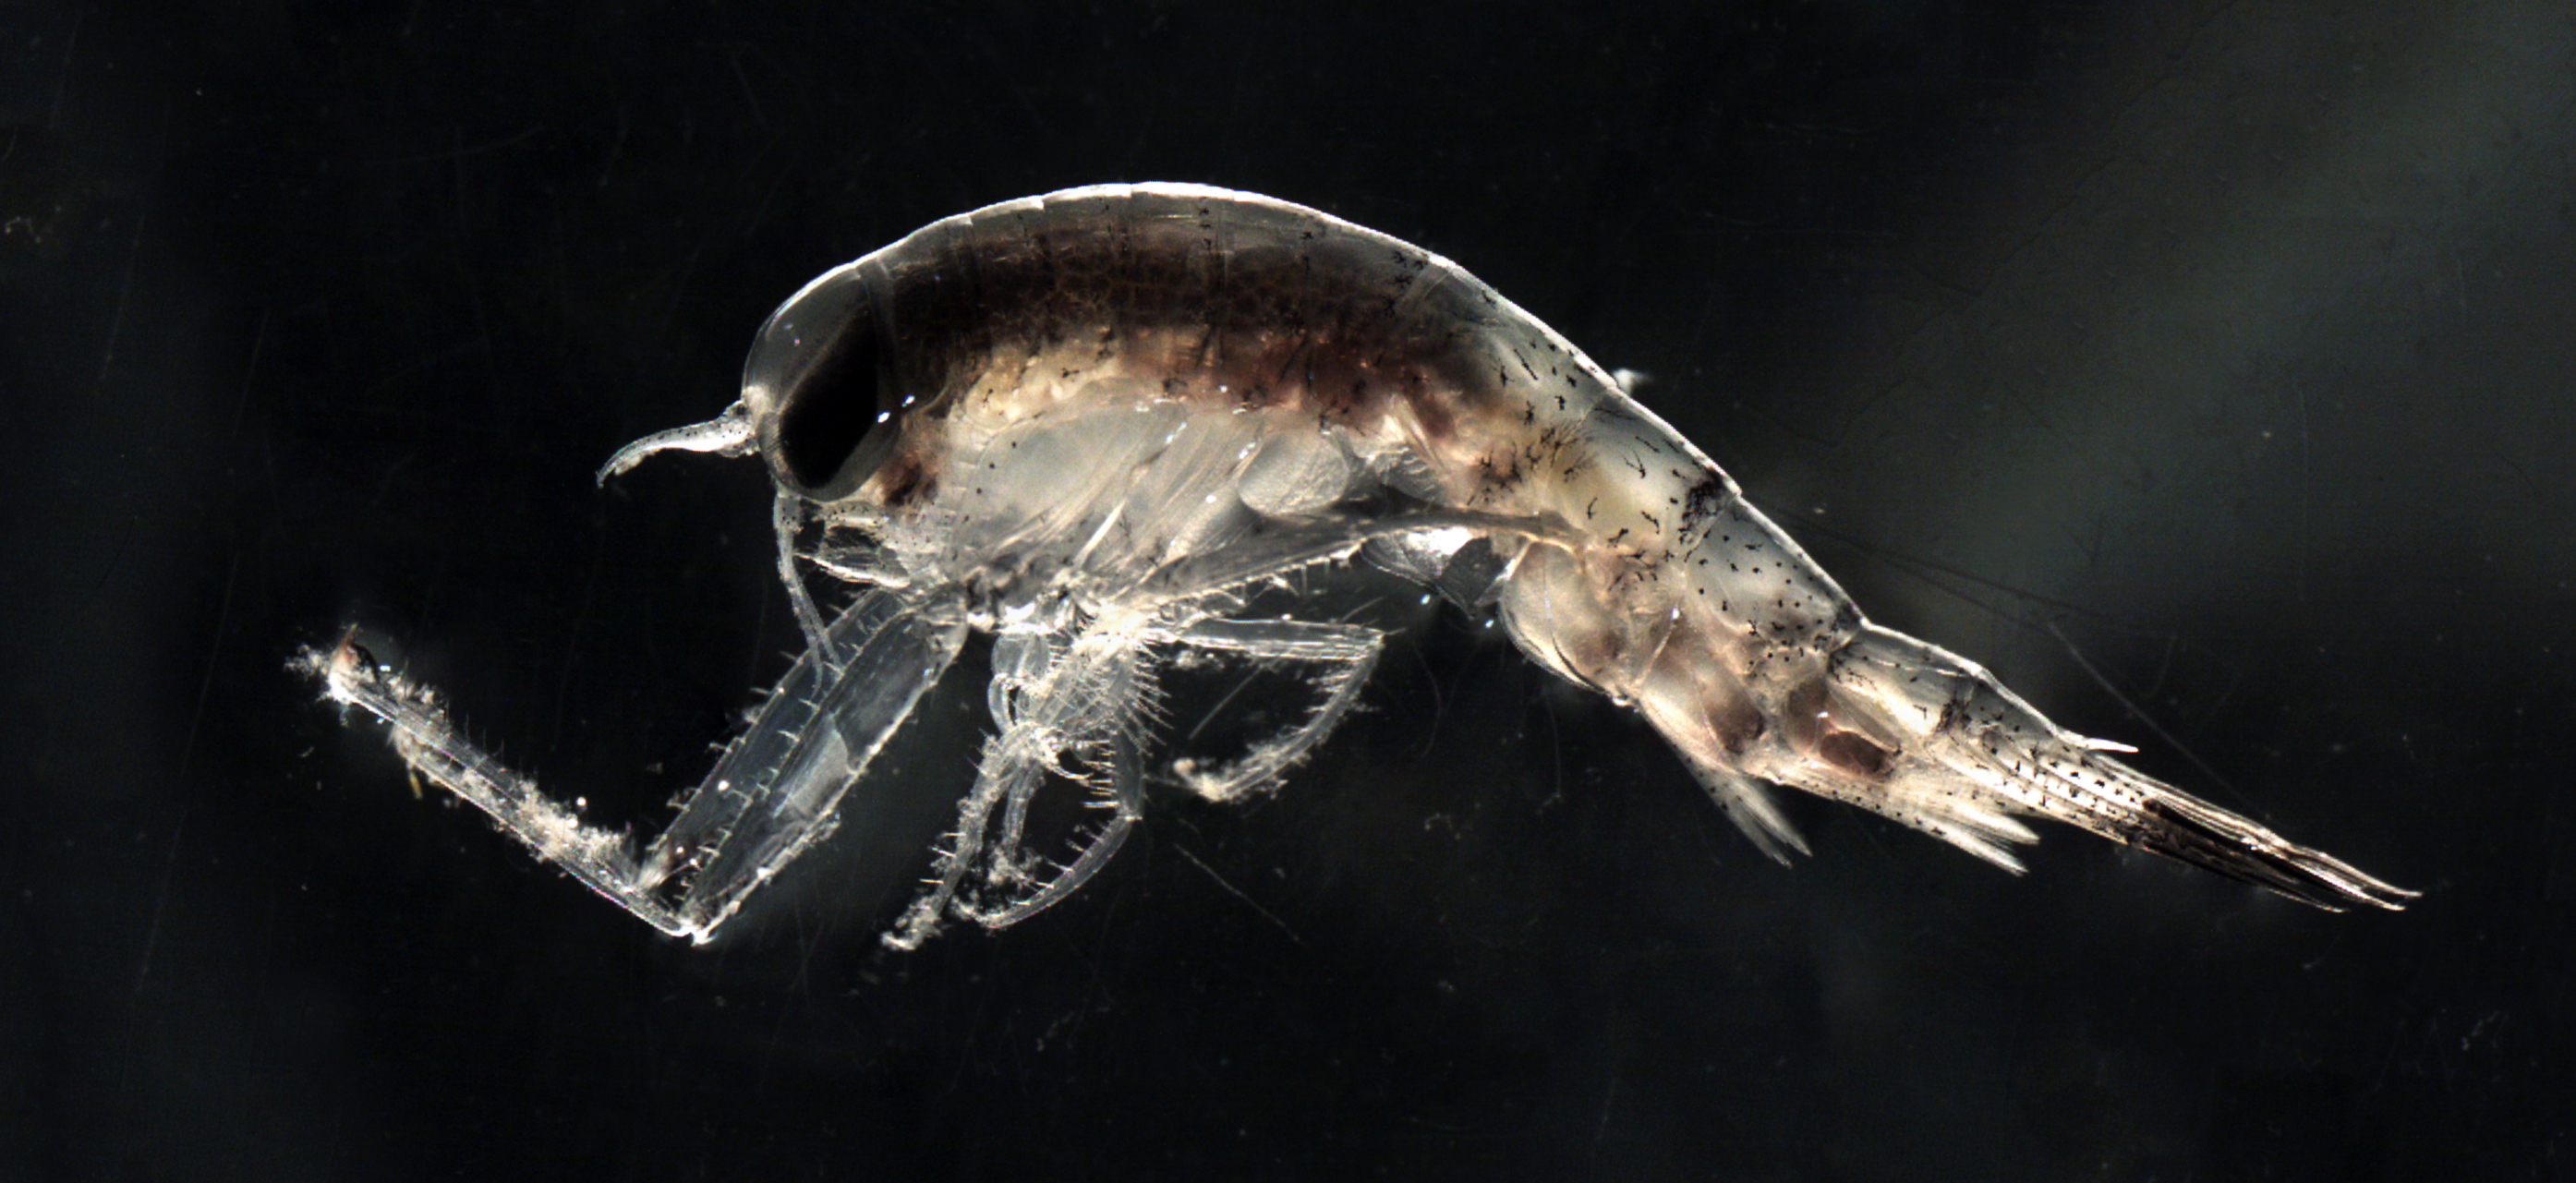 Themisto libellula, an amphipod crustacean and a predatory hunter of copepods such as Calanus, is a probable werewolf of the Arctic.